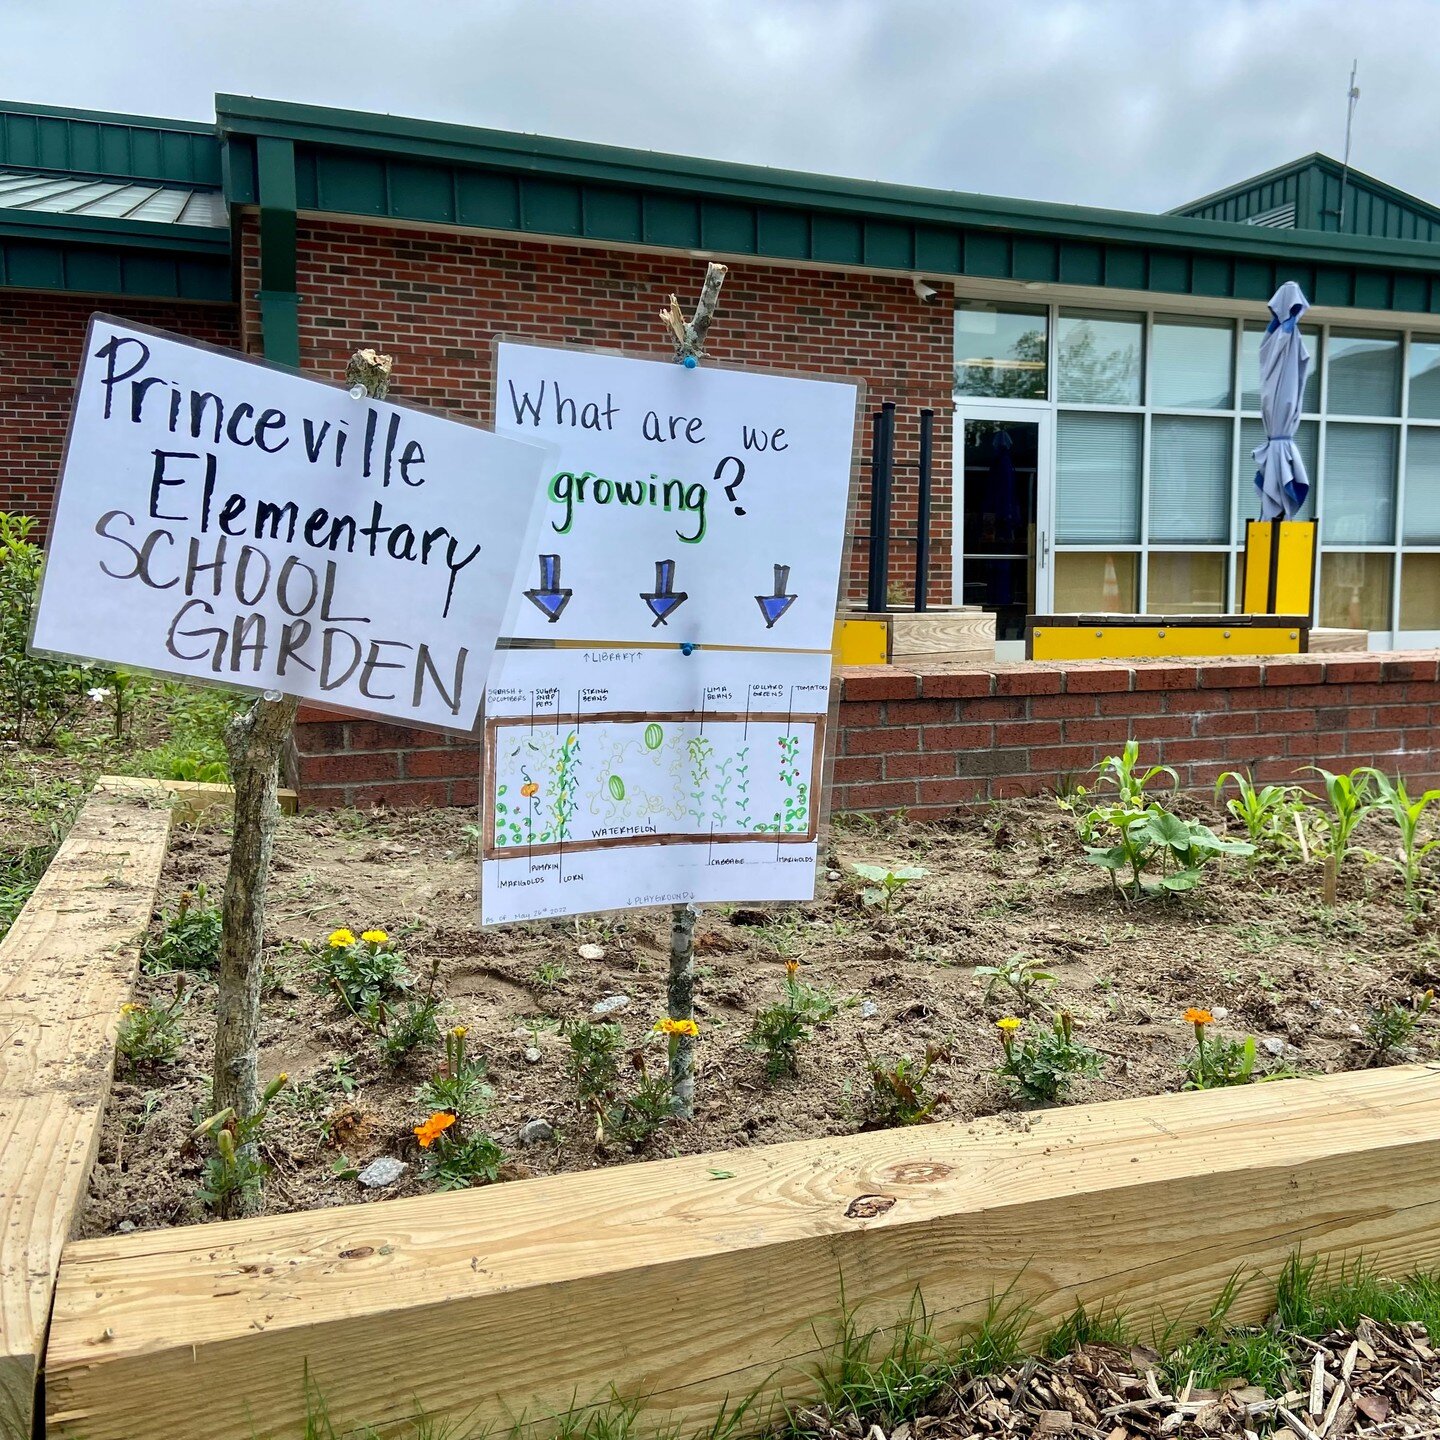 😍 It's so awesome to be part of the team that's growing something great at Princeville Elementary! Thanks for the pics @fancy___nancy___ 🌱🌱🌱

#schoolgarden #outdoorlearning #futurestewards